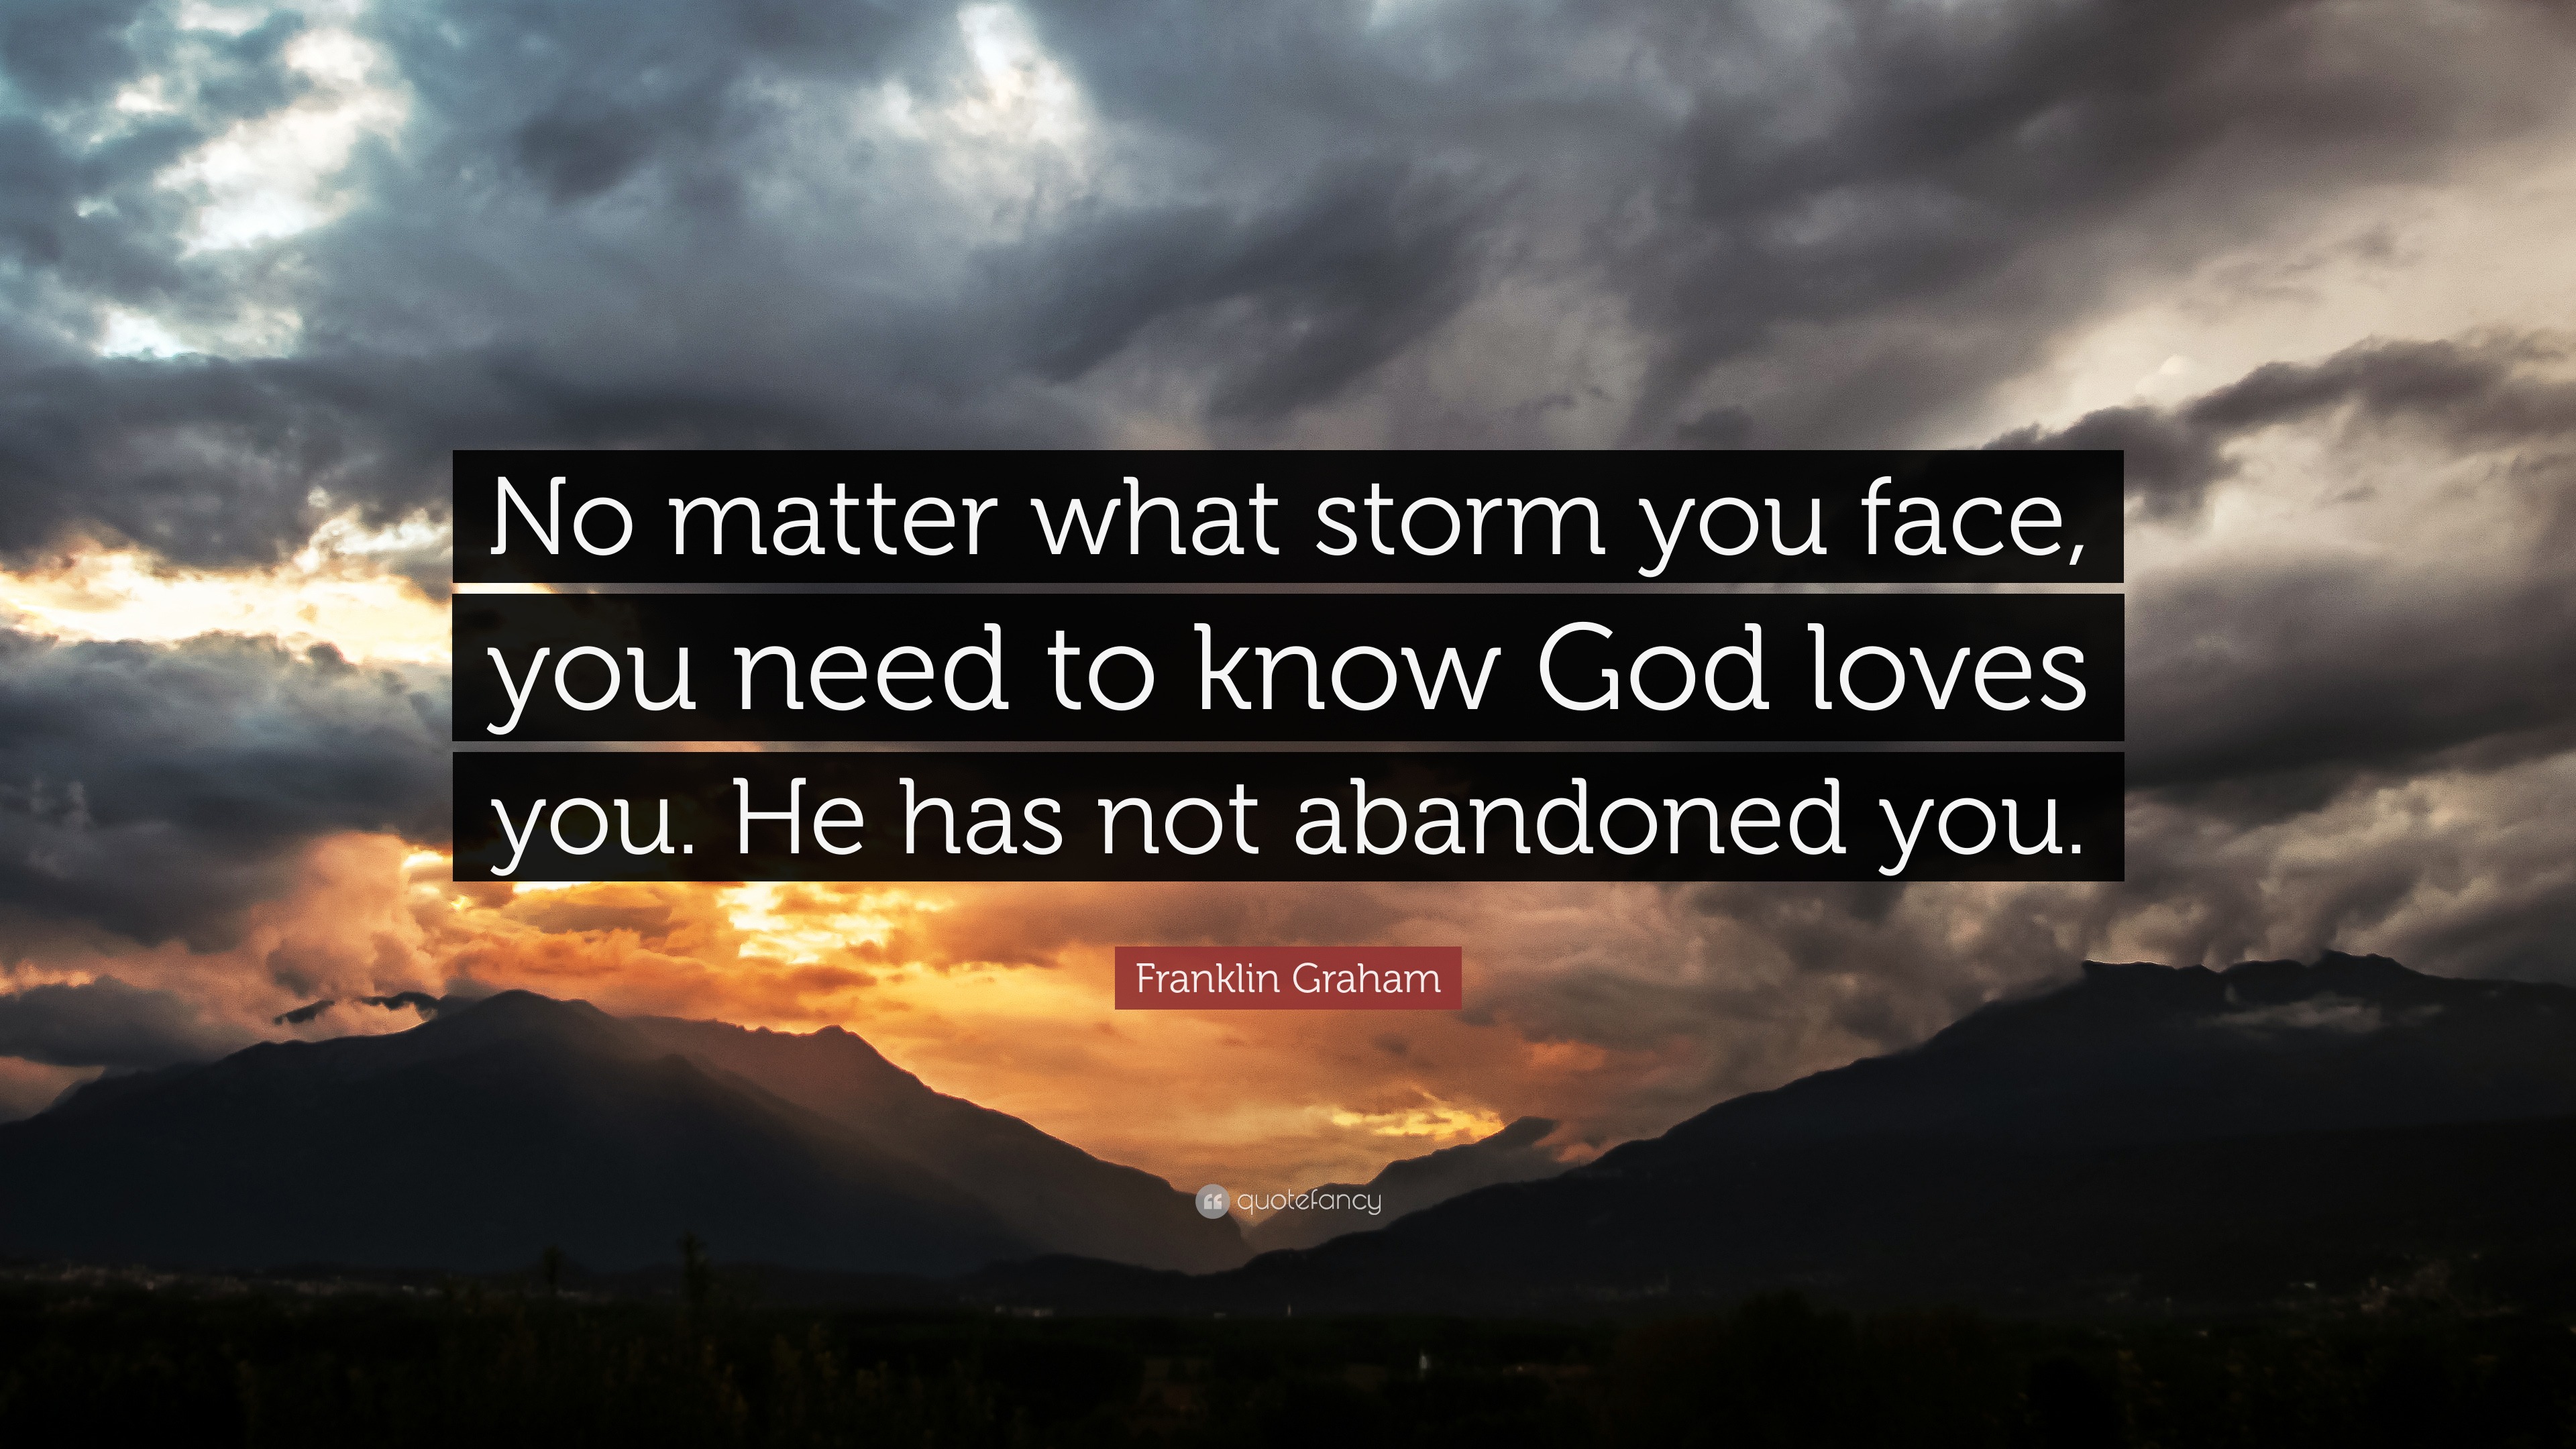 Franklin Graham Quote “No matter what storm you face you need to know